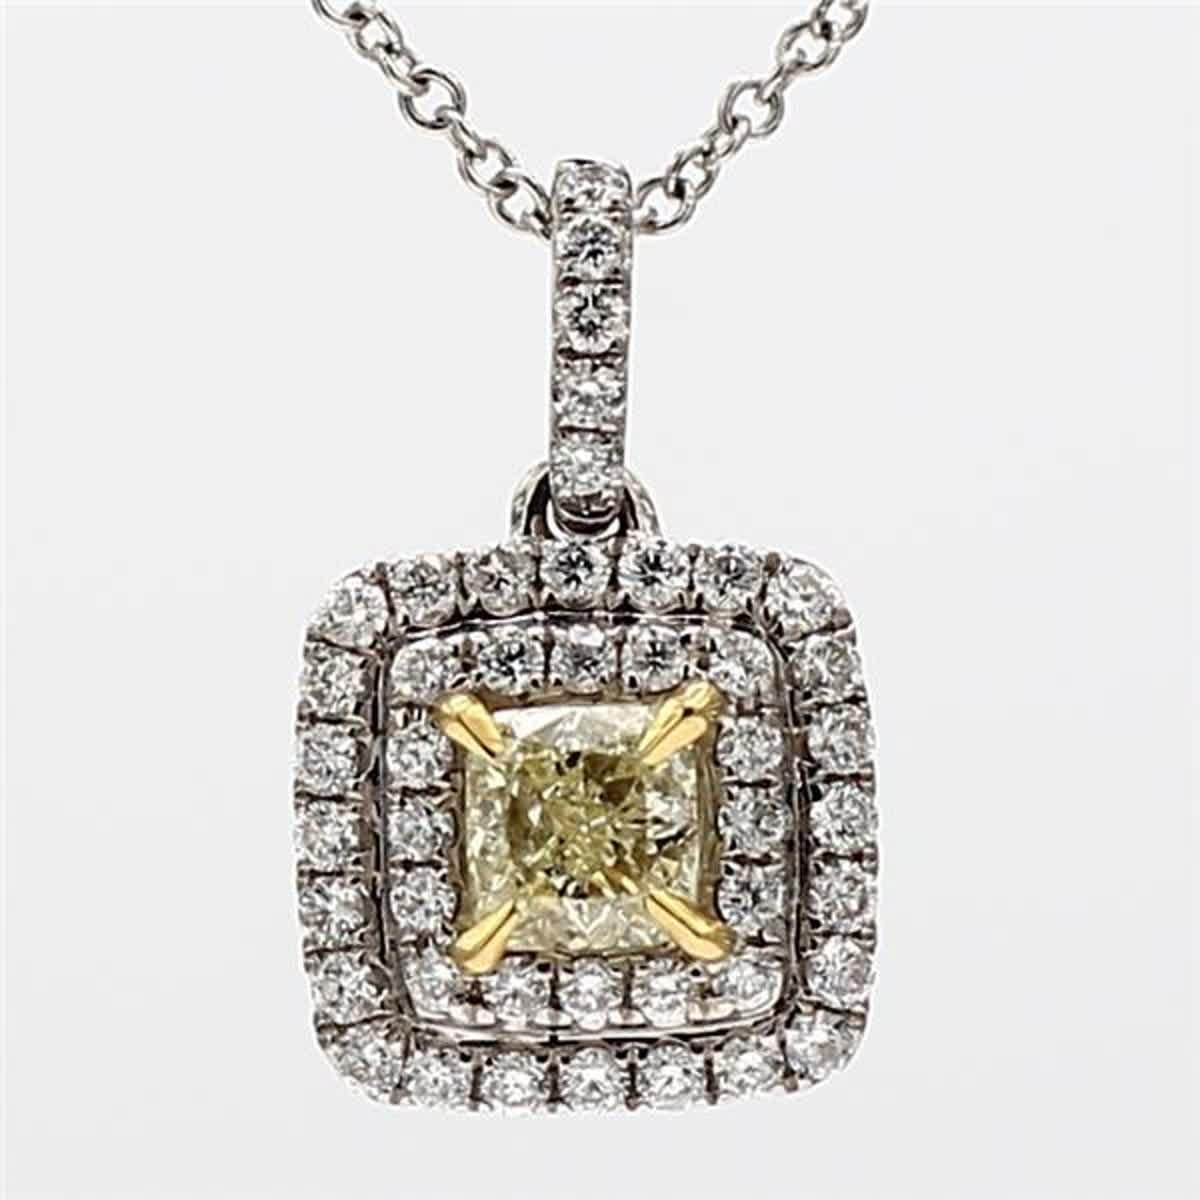 RareGemWorld's classic diamond necklace. Mounted in a beautiful 18K Yellow and White Gold setting with natural radiant cut yellow diamonds. The yellow diamonds are surrounded by small round natural white diamond melee. This necklace is guaranteed to